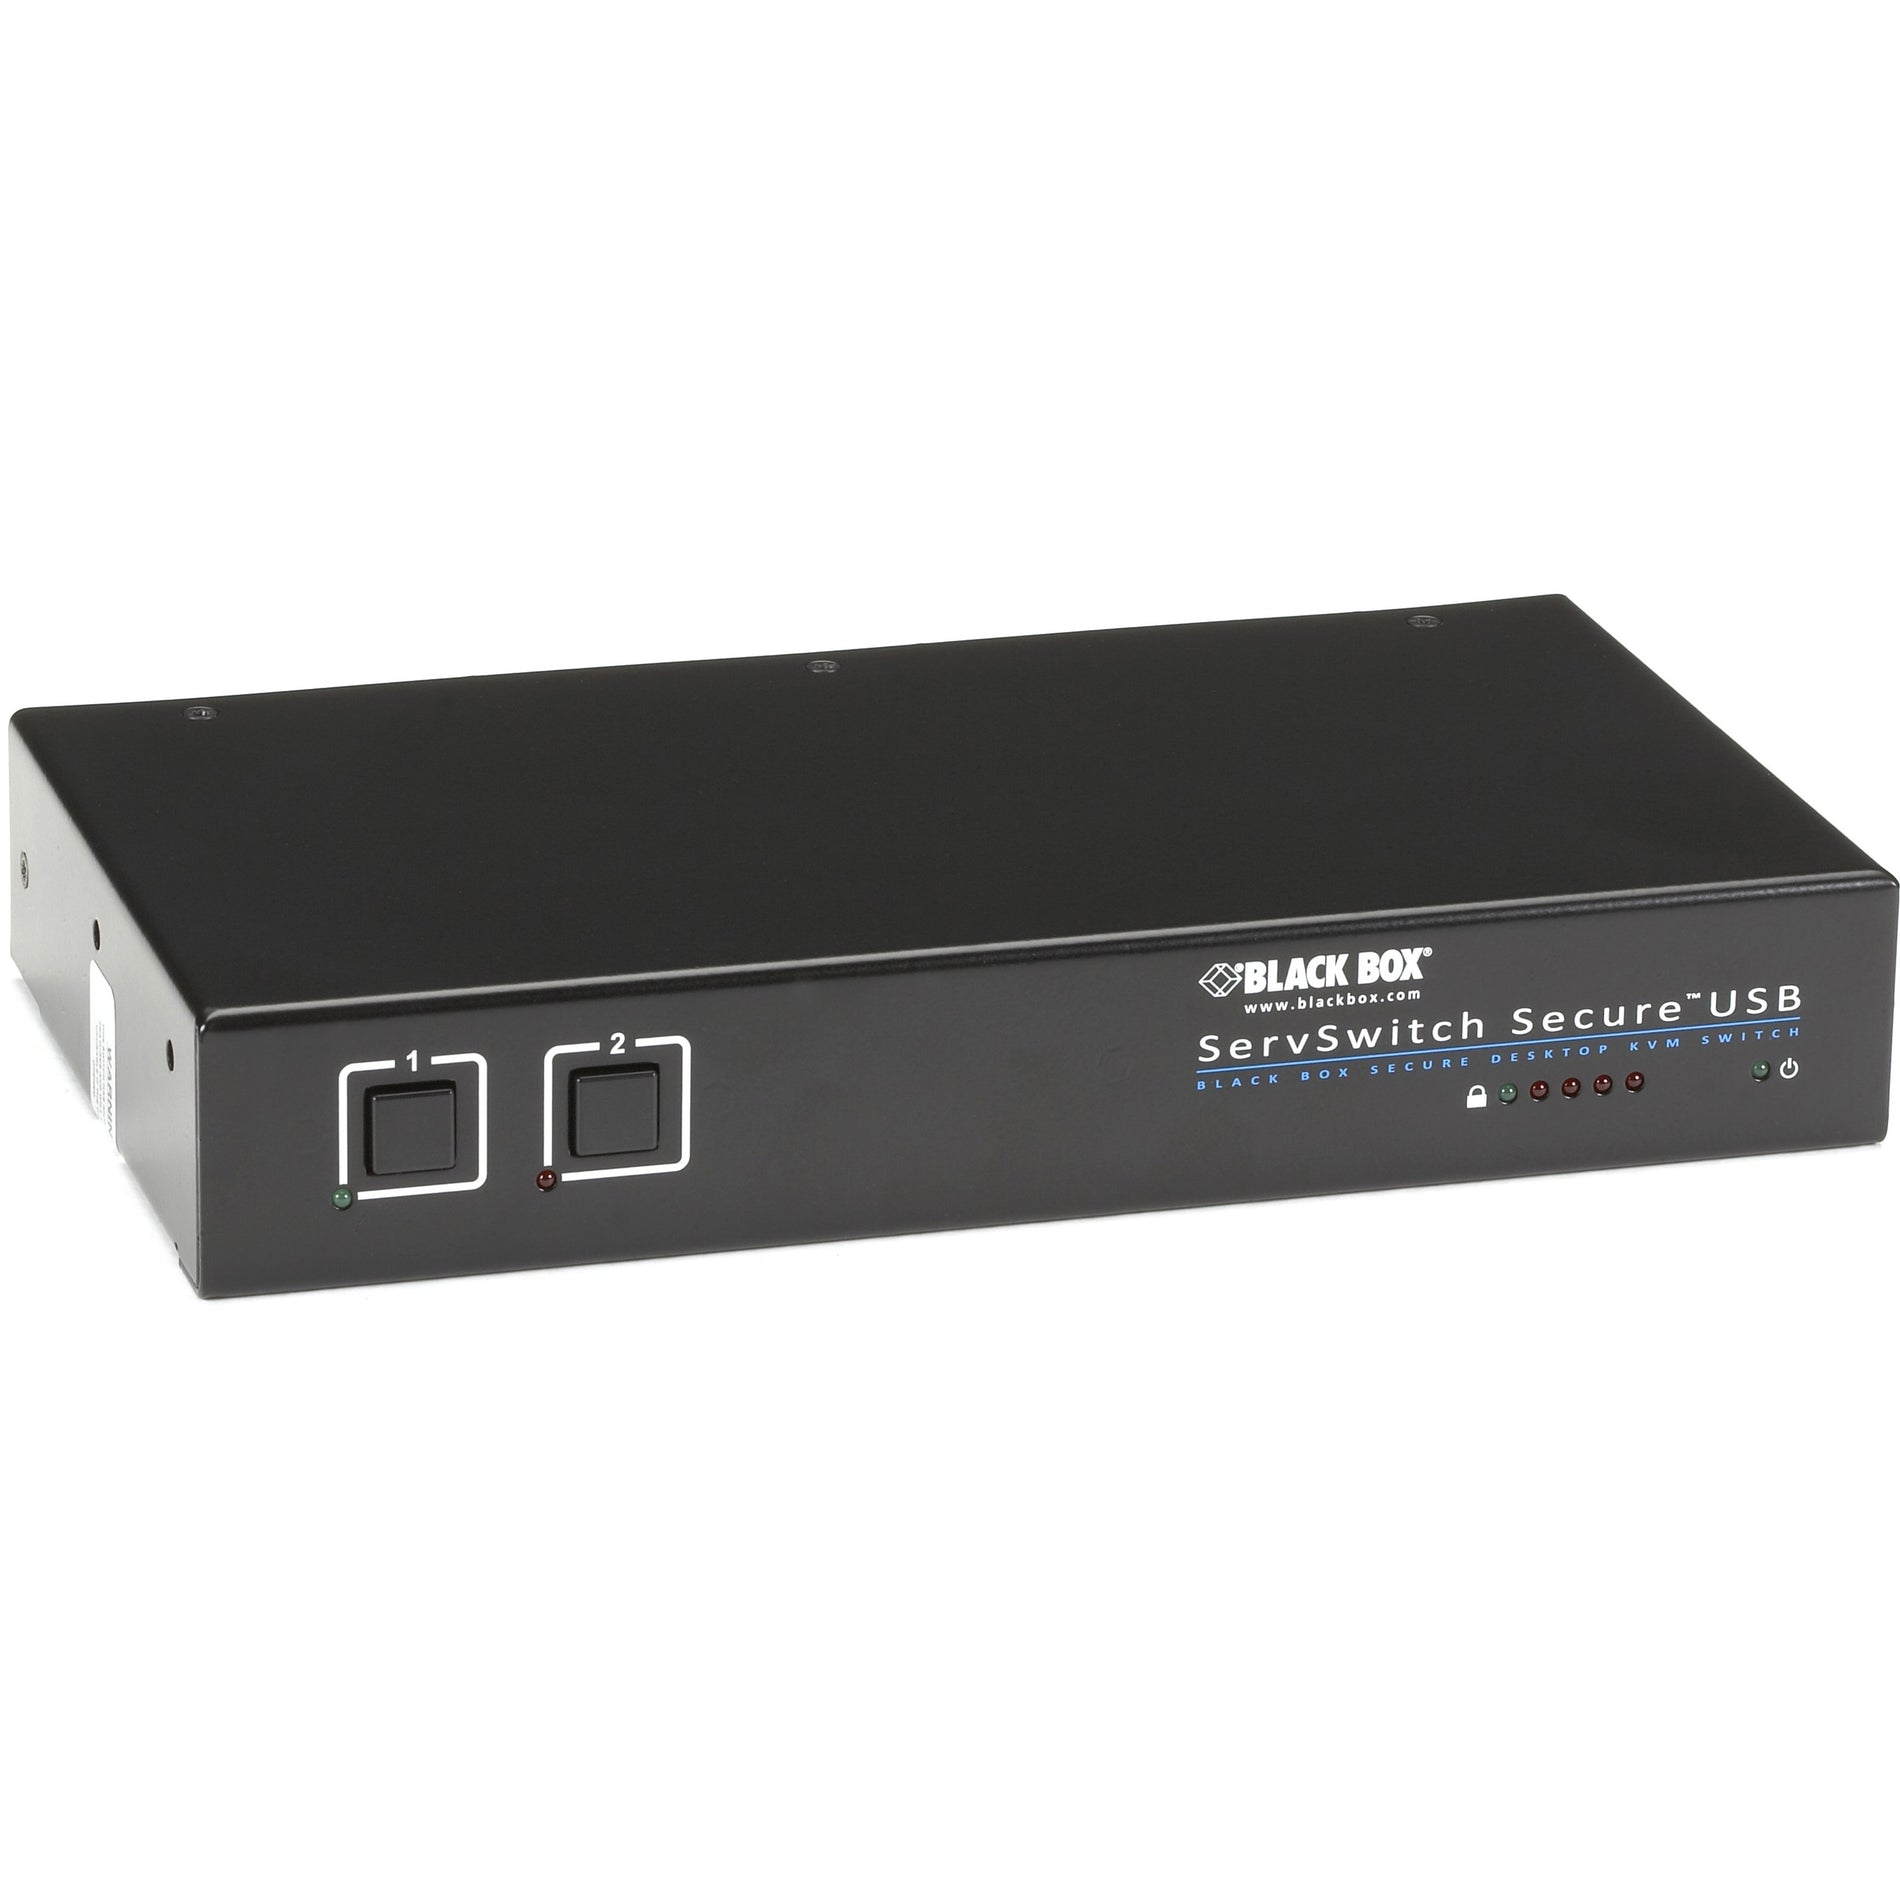 Black Box SW2006A-USB-EAL ServSwitch KM Switchbox, USB/VGA, 2 Computers Supported, 2 Year Warranty